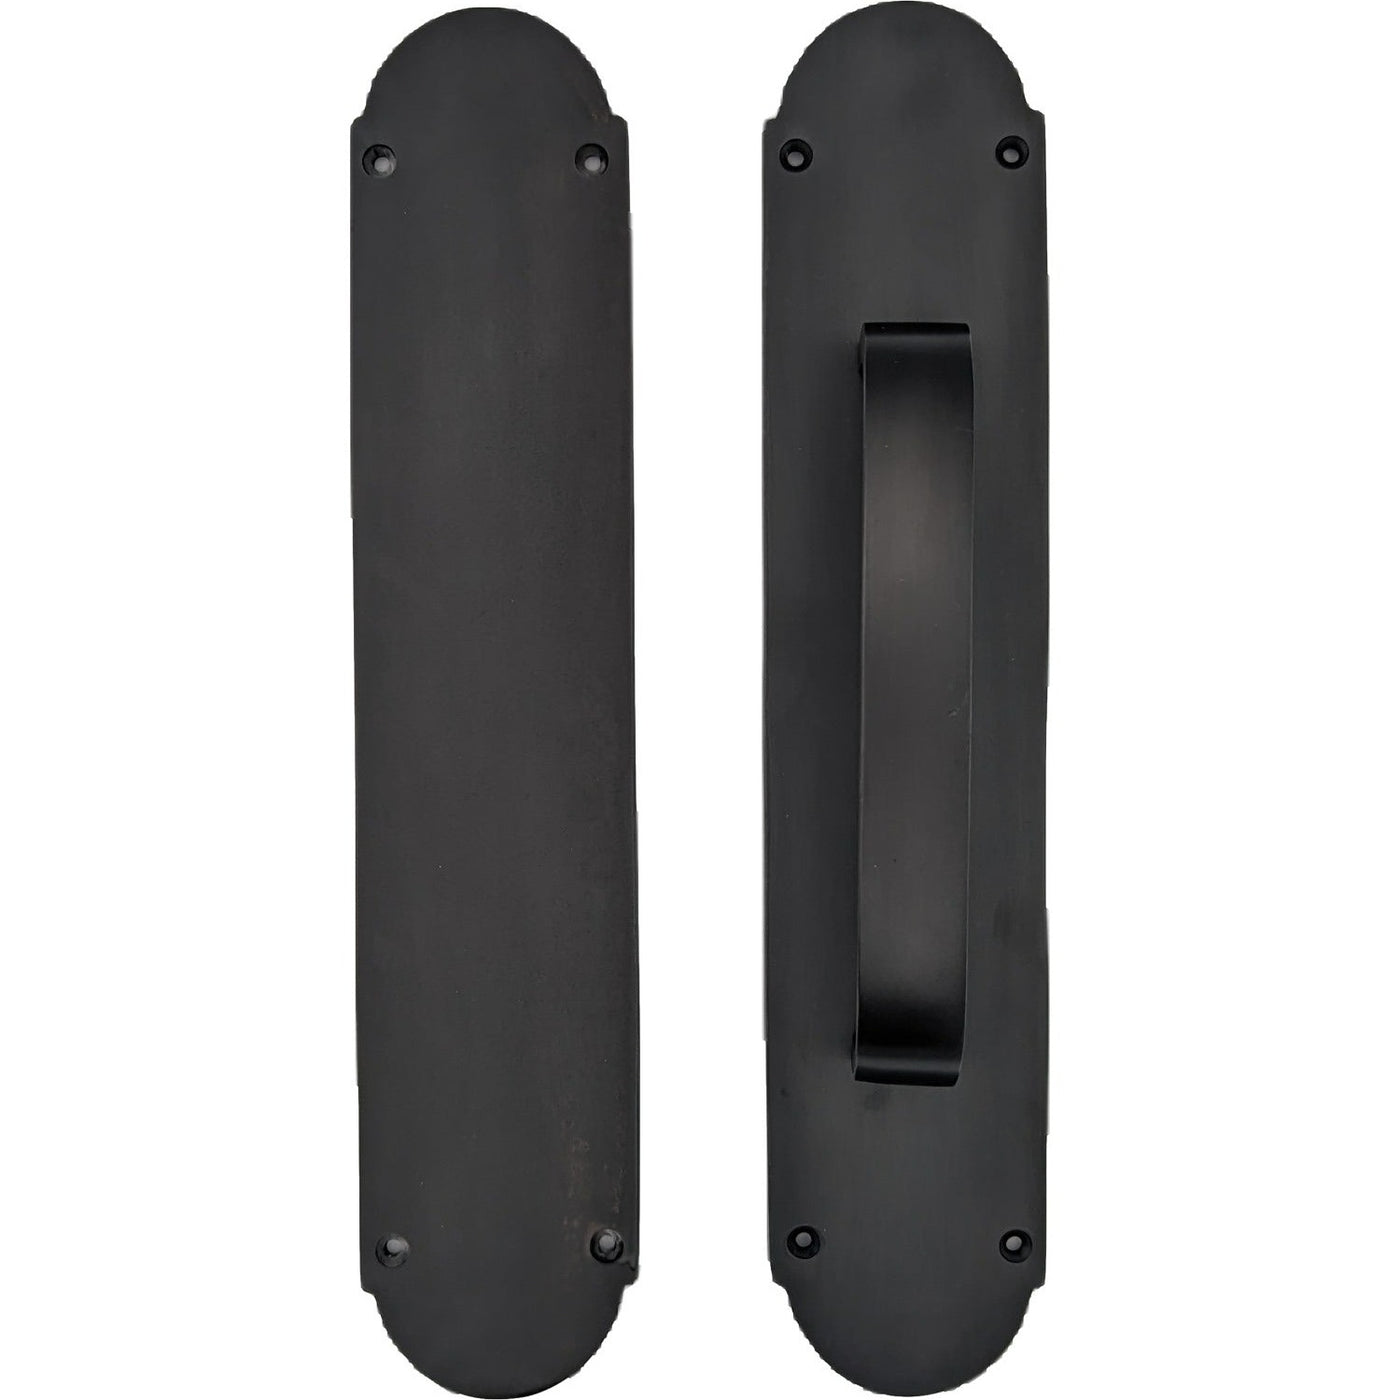 12 Inch Traditional Style Door Push and Pull Plate Set